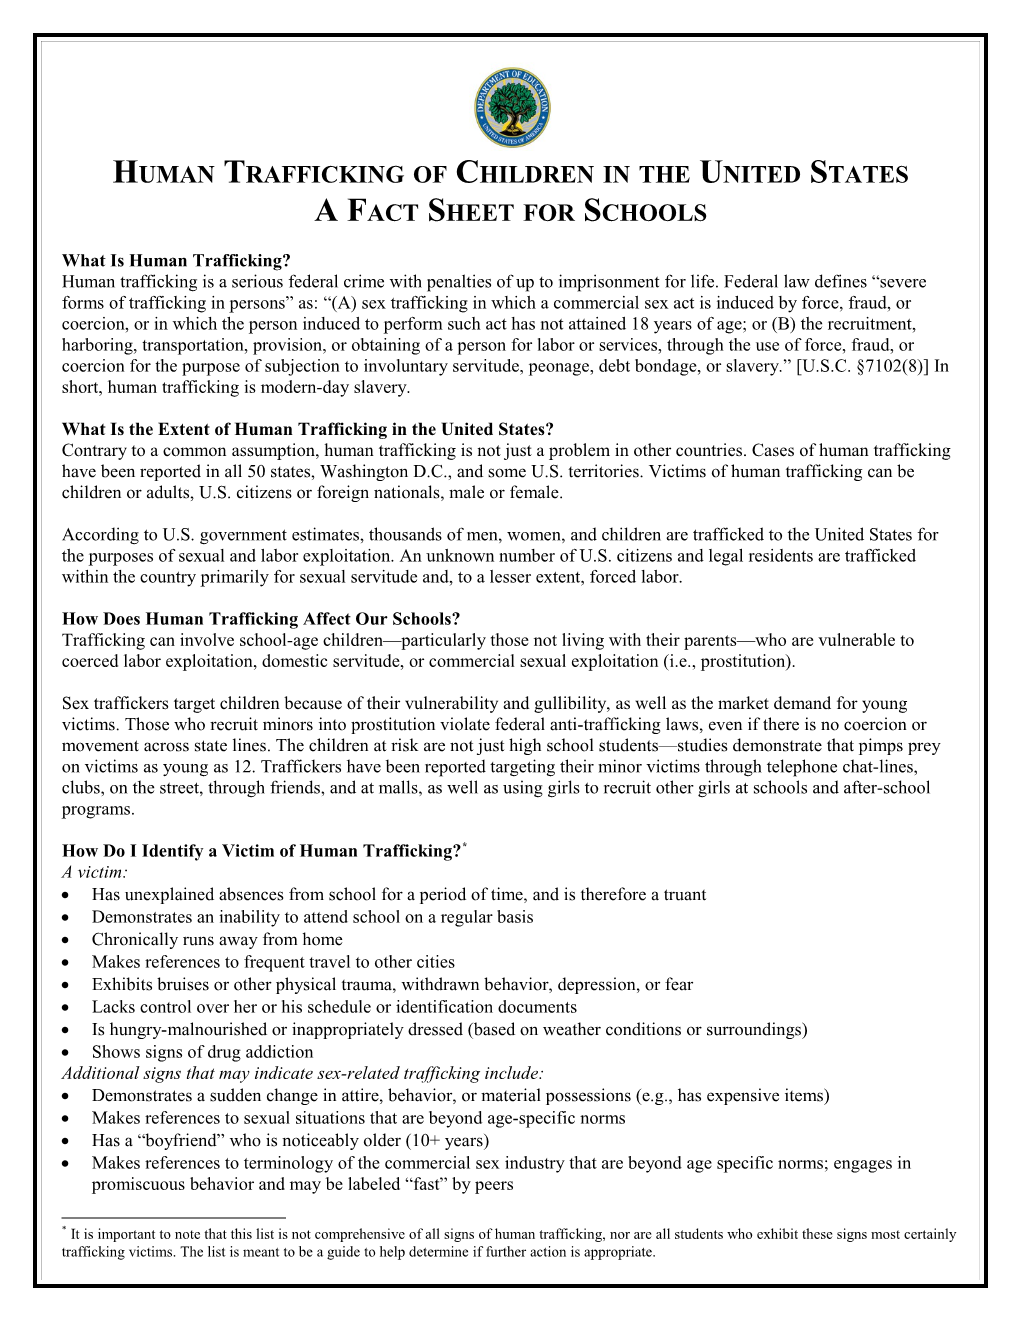 Human Trafficking of Children in the US a Fact Sheet for Schools (MS Word)